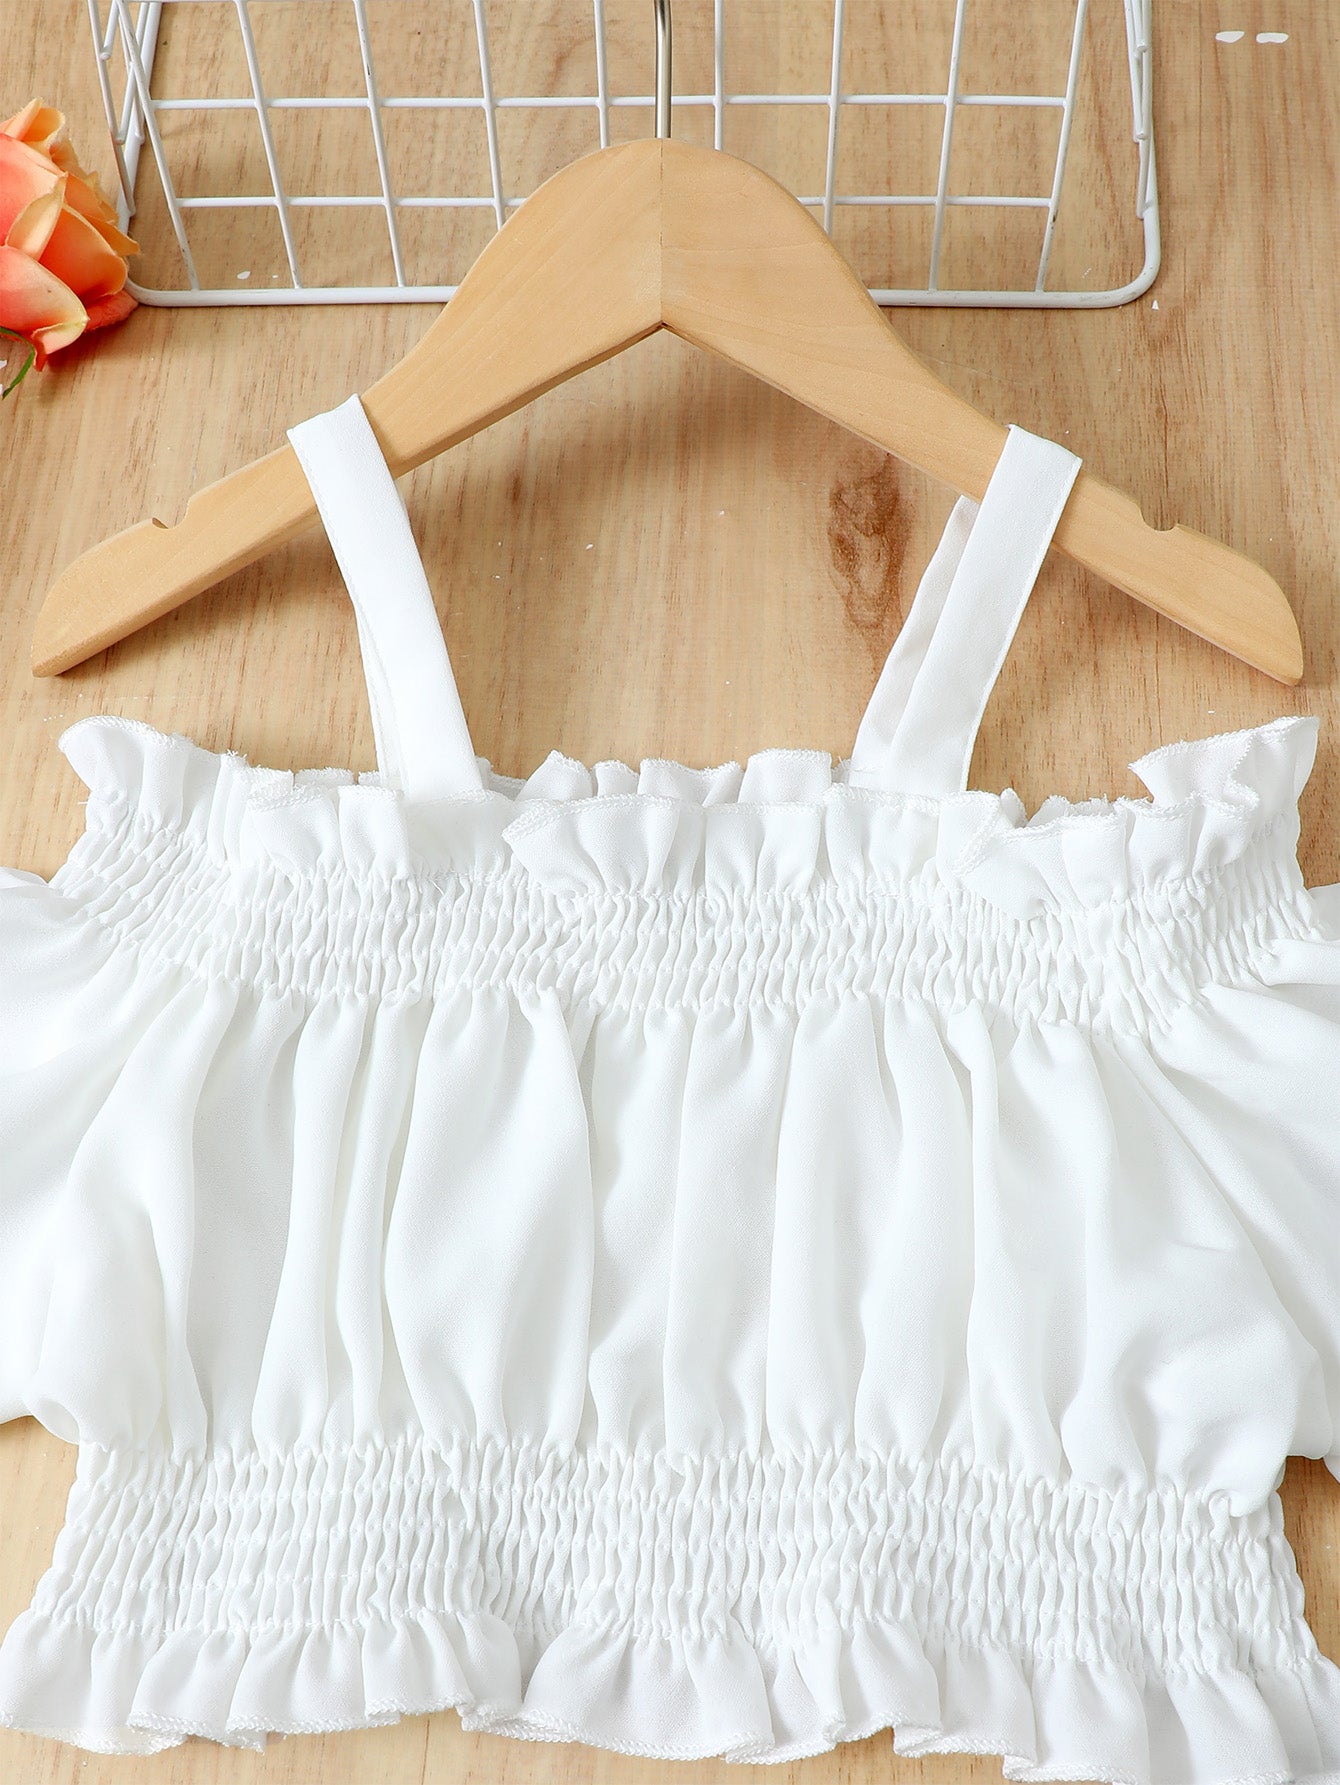 Children’s Girls Frill Trim Cropped Top and Striped Pants Set